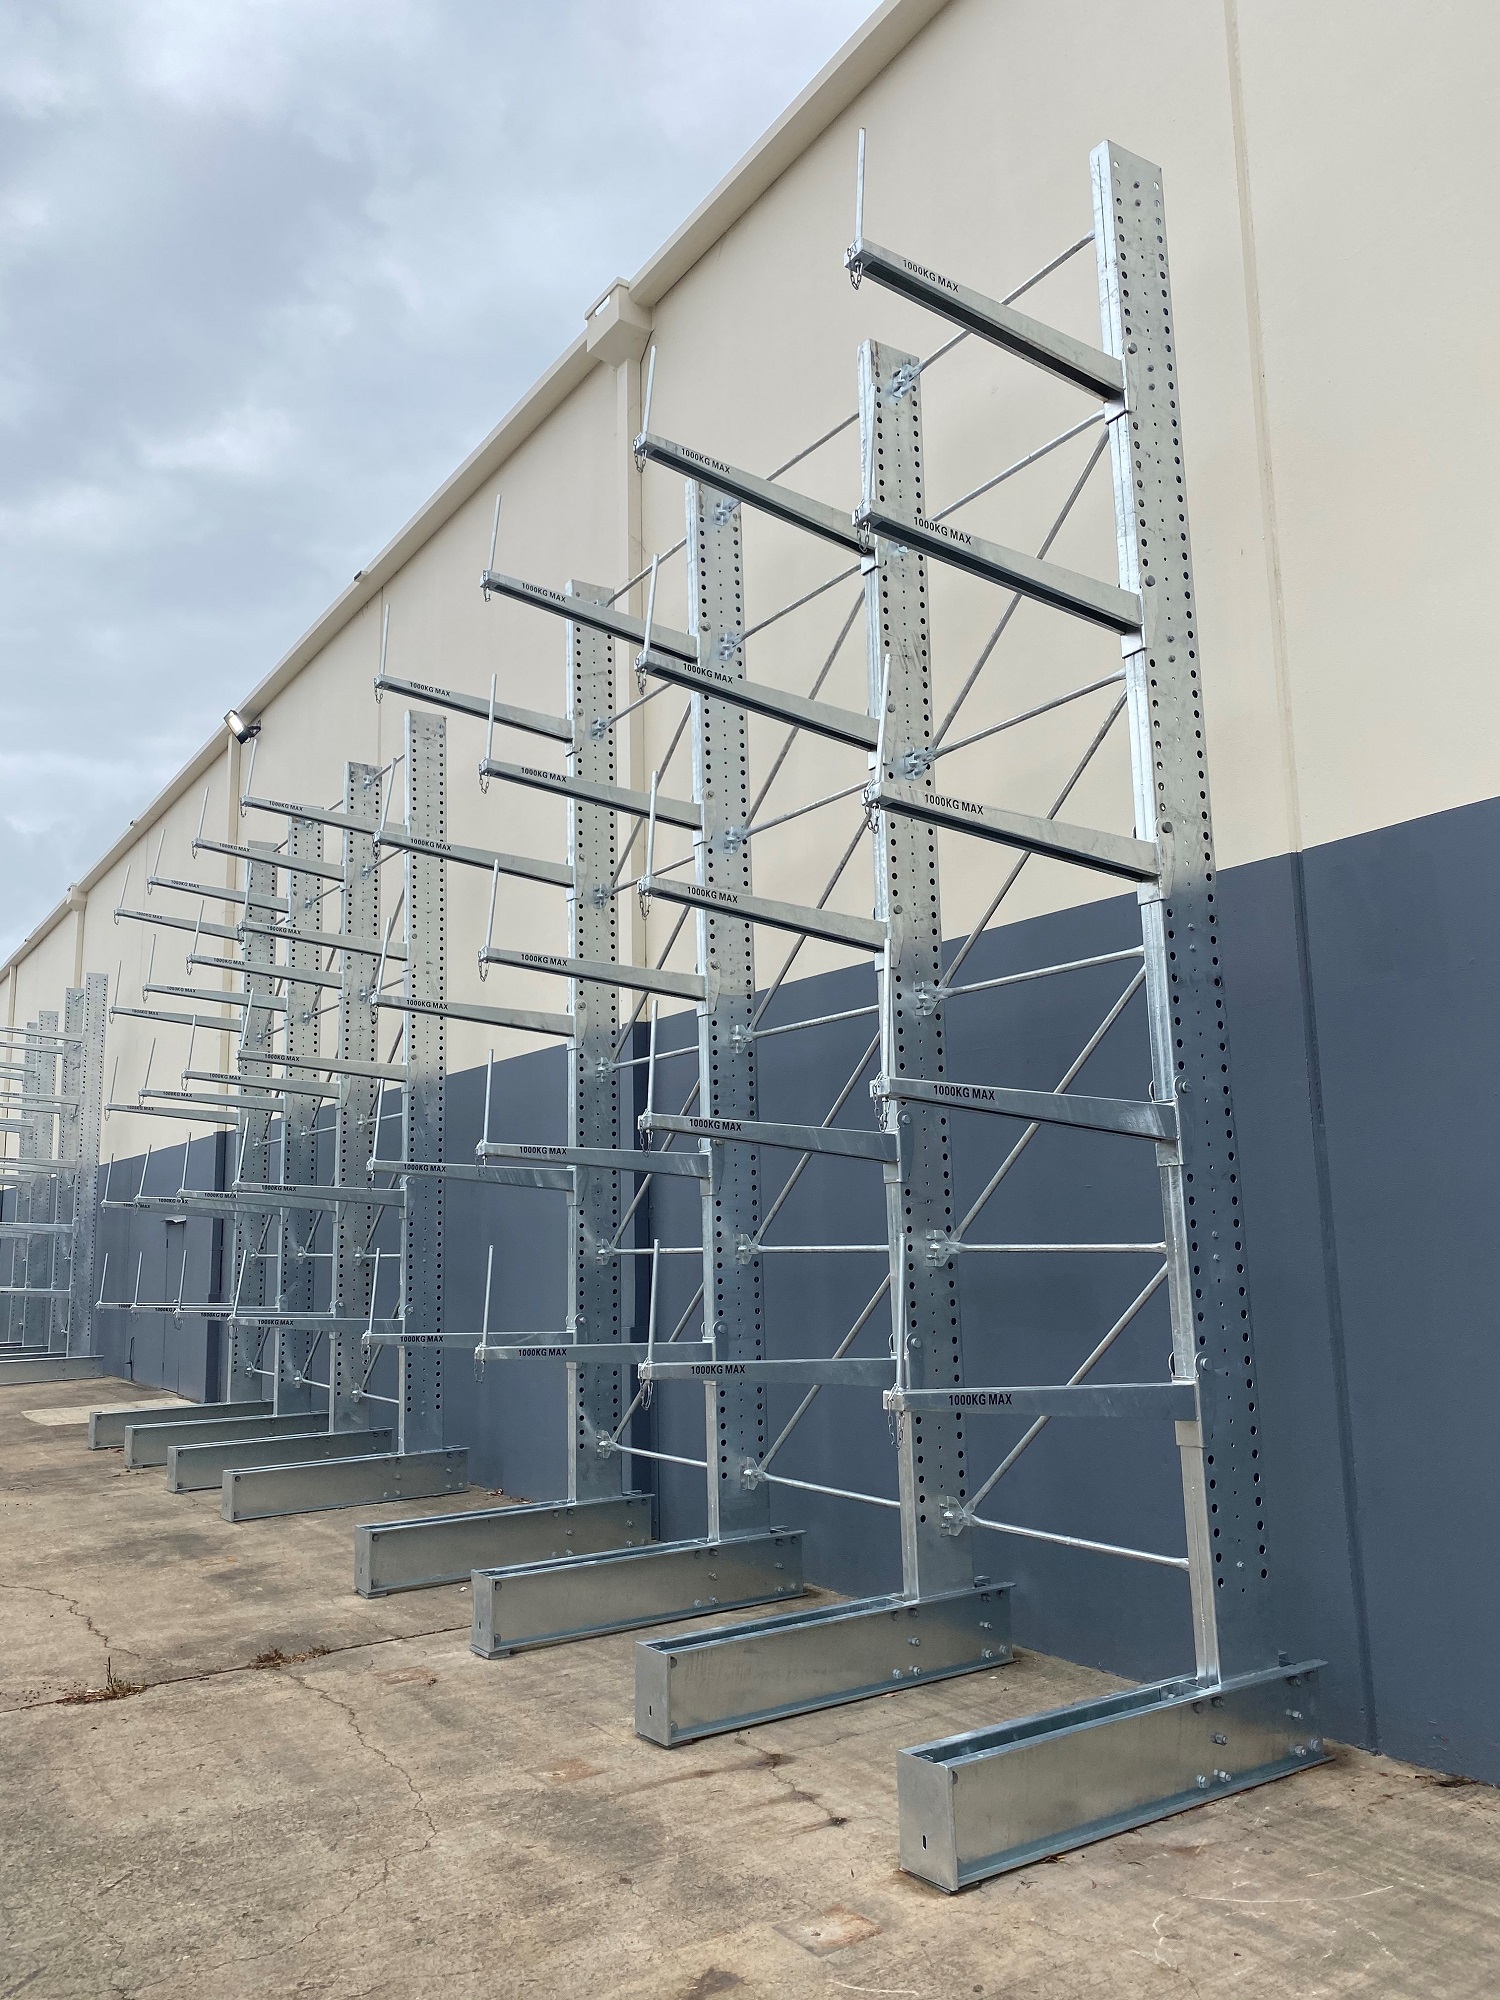 Long and heavy steel storage racks placed outside the warehouse